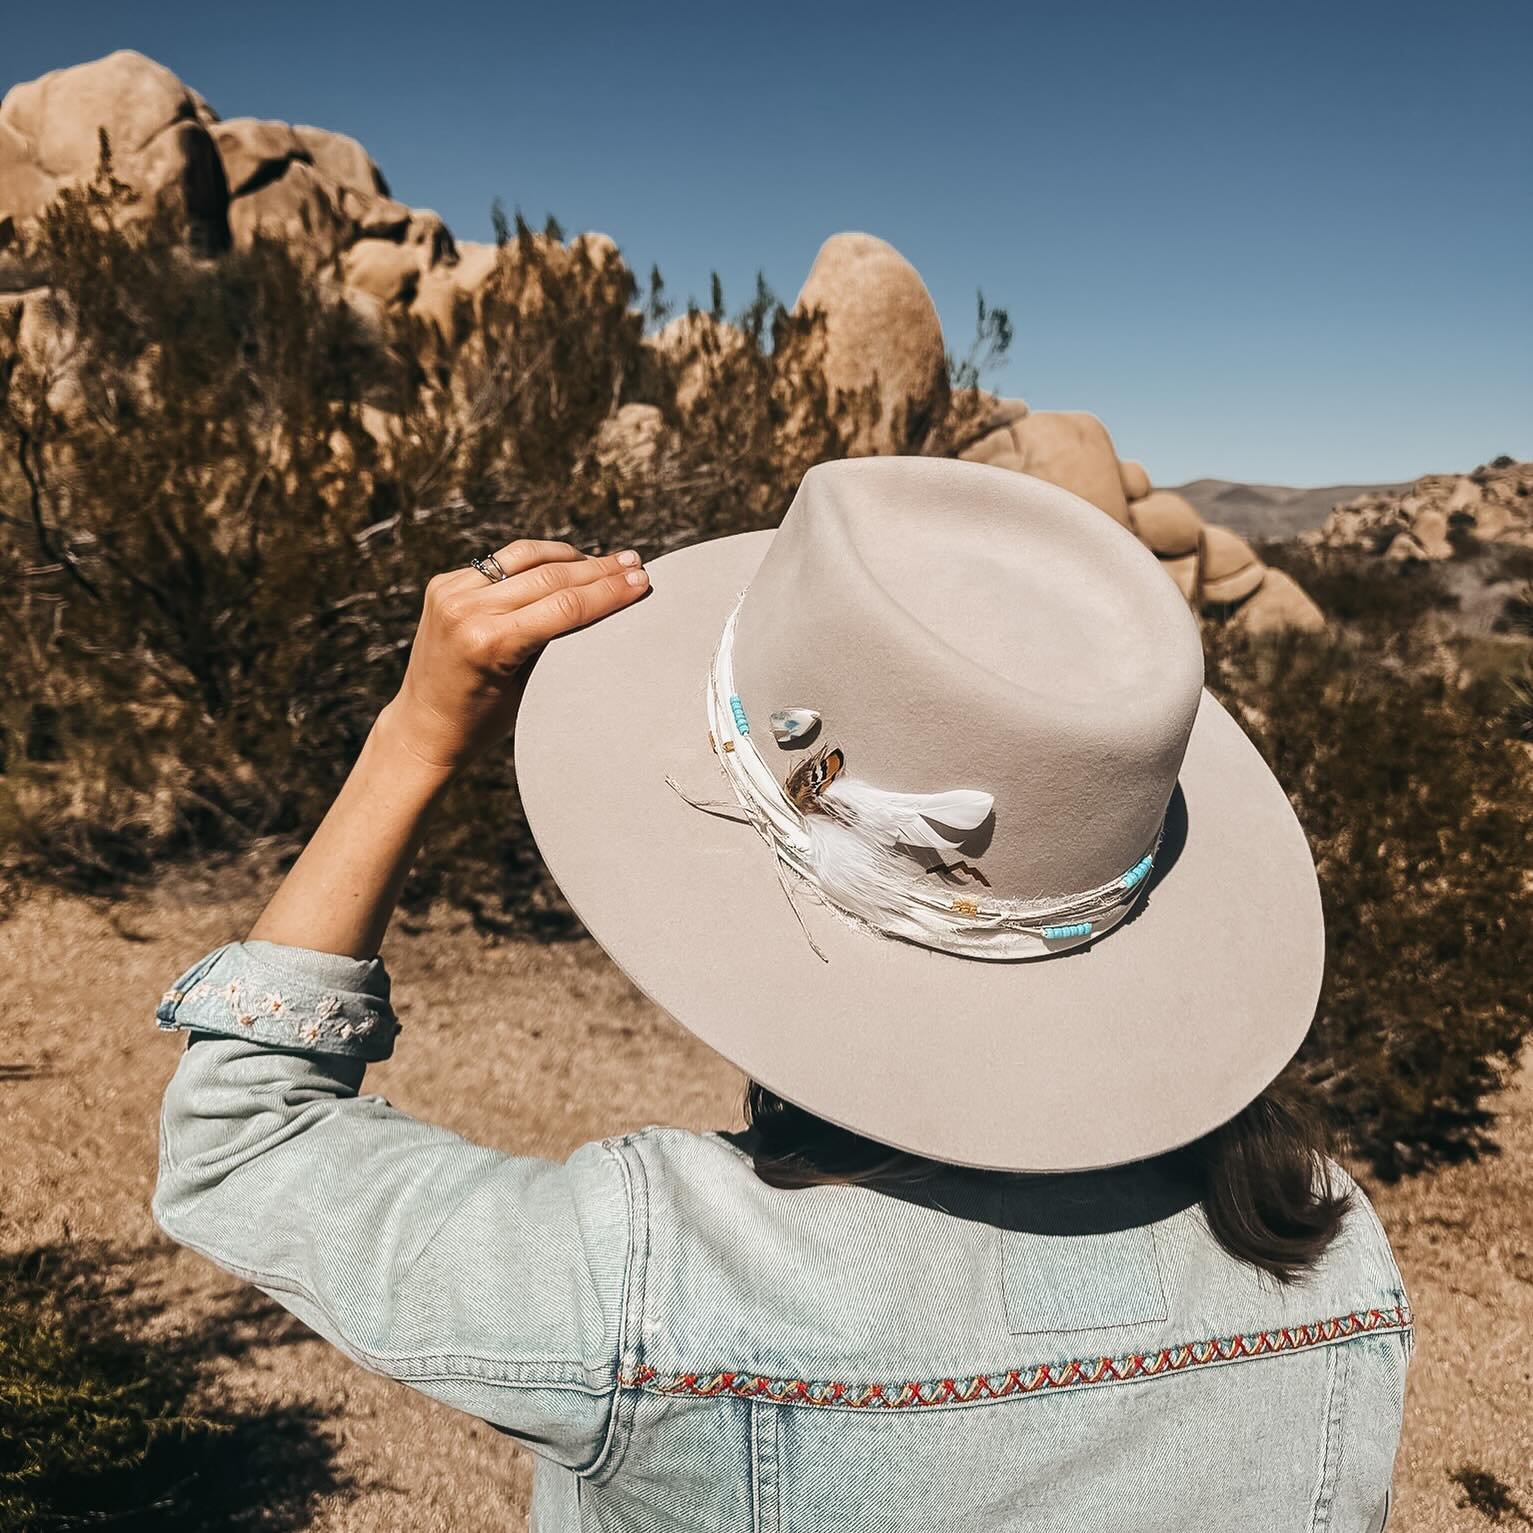 &ldquo;For all the adventures I have not seen.&rdquo; Our @brimroad hats are likely to make your next trip more memorable. Spotted: @tkmcgann1 took her desert-inspired hat to Joshua Tree last week 🌵